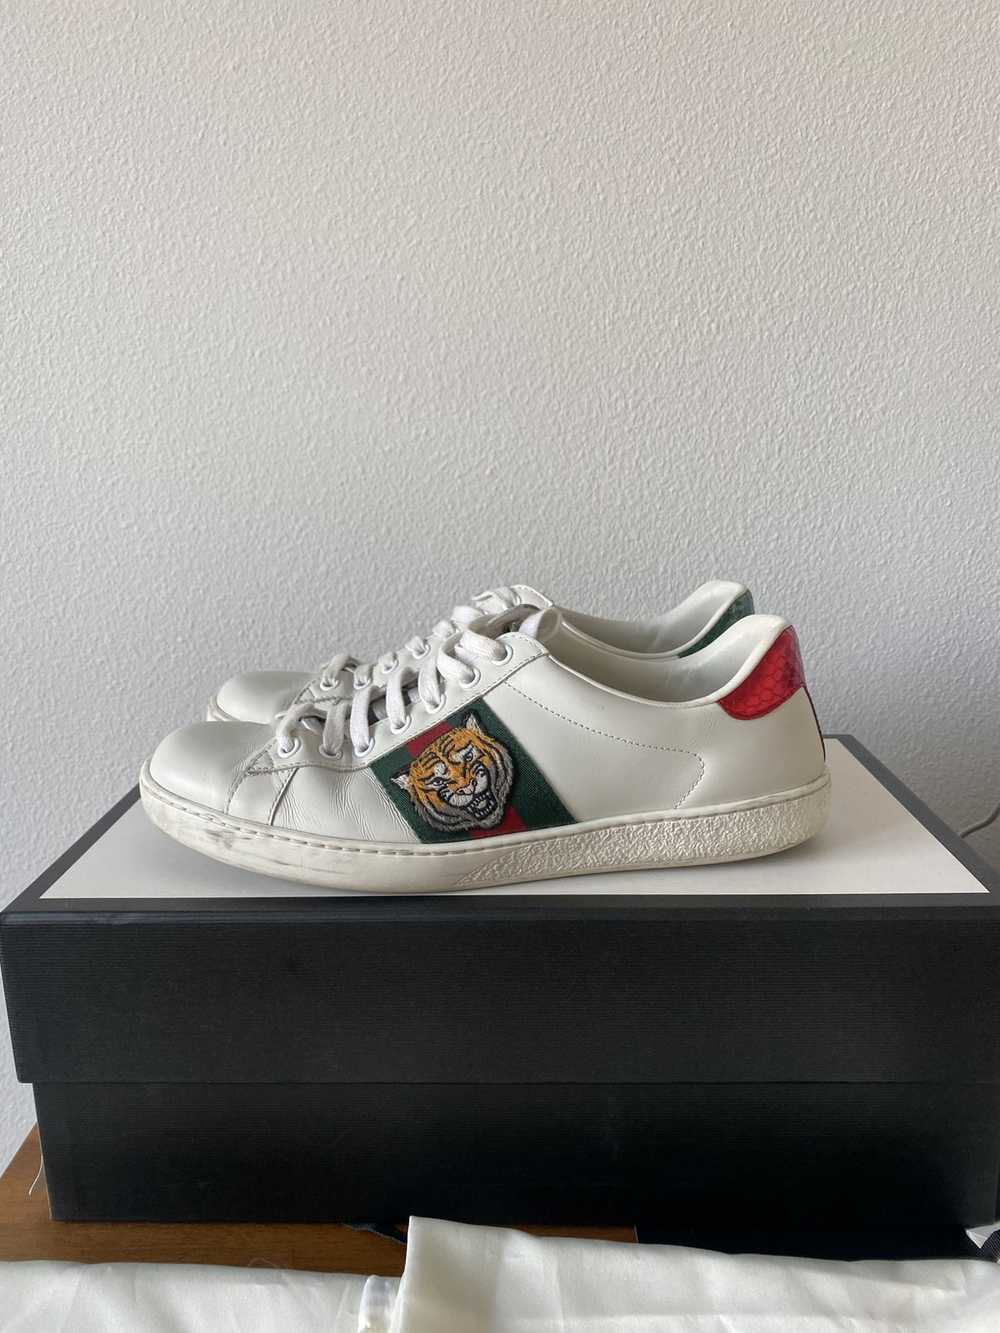 Gucci Gucci Ace Embroidered Tiger Sneakers - image 3